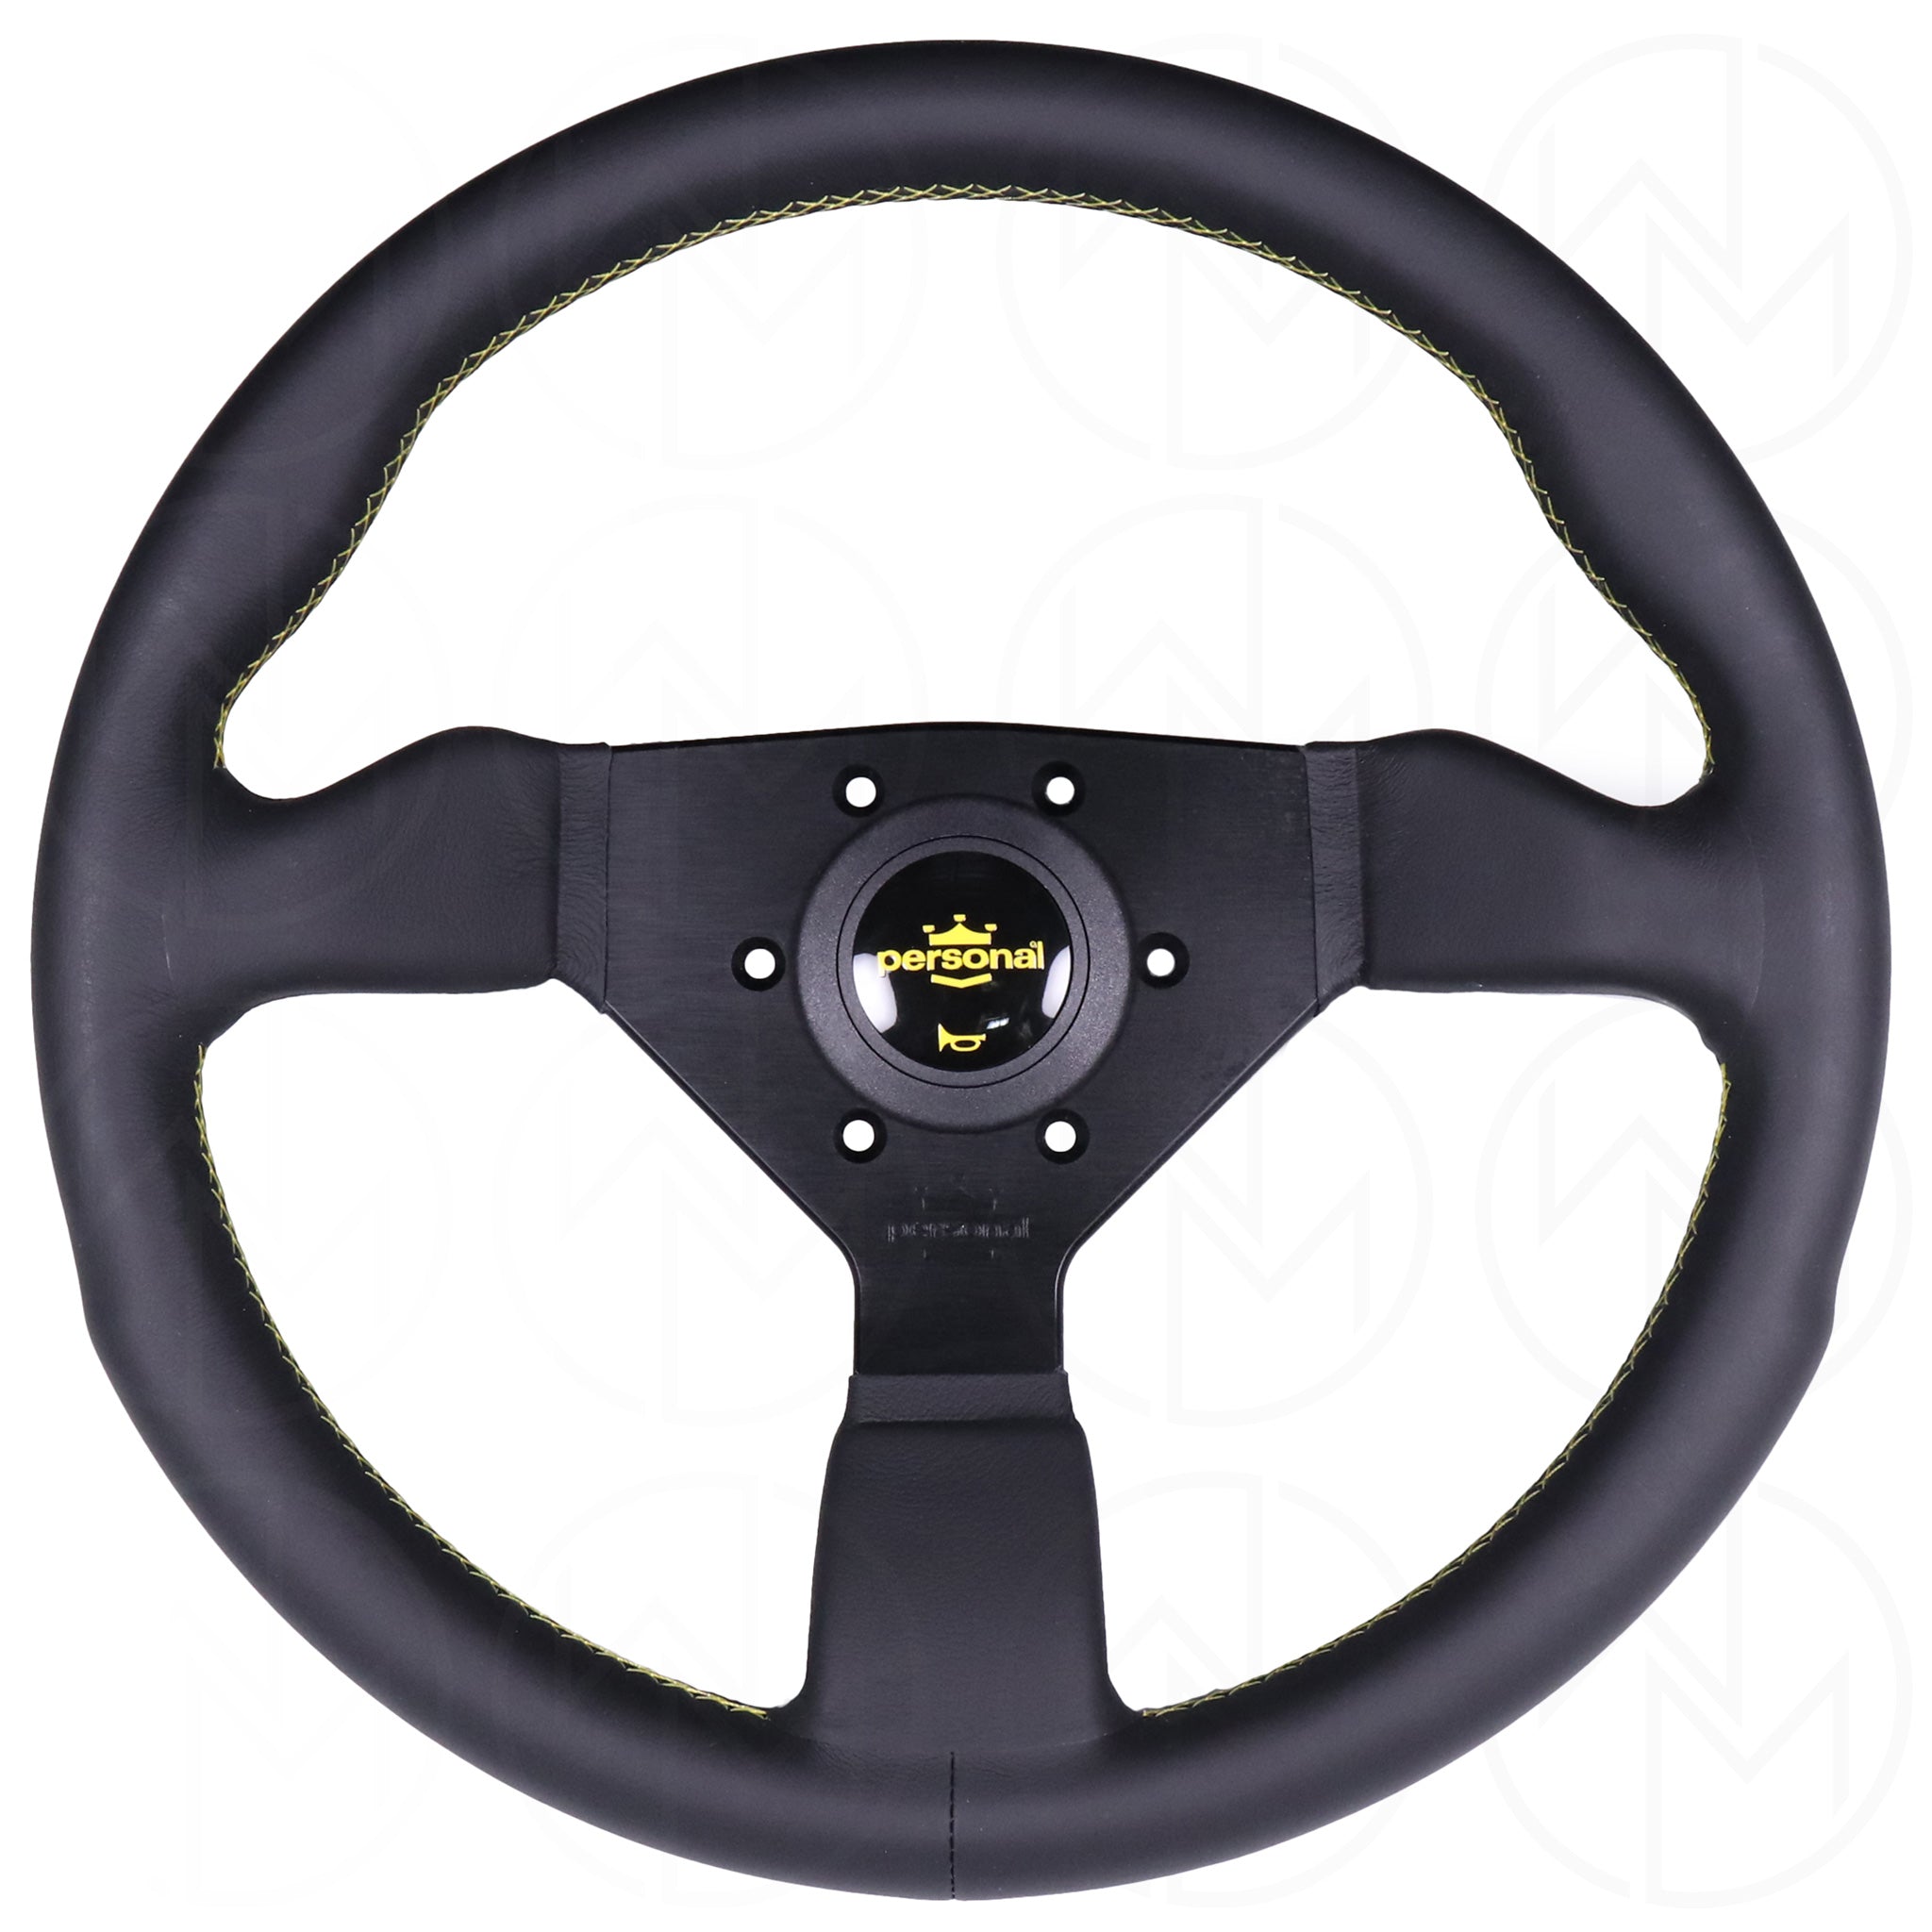 Personal Grinta Steering Wheel - 350mm Leather w/Yellow Stitch